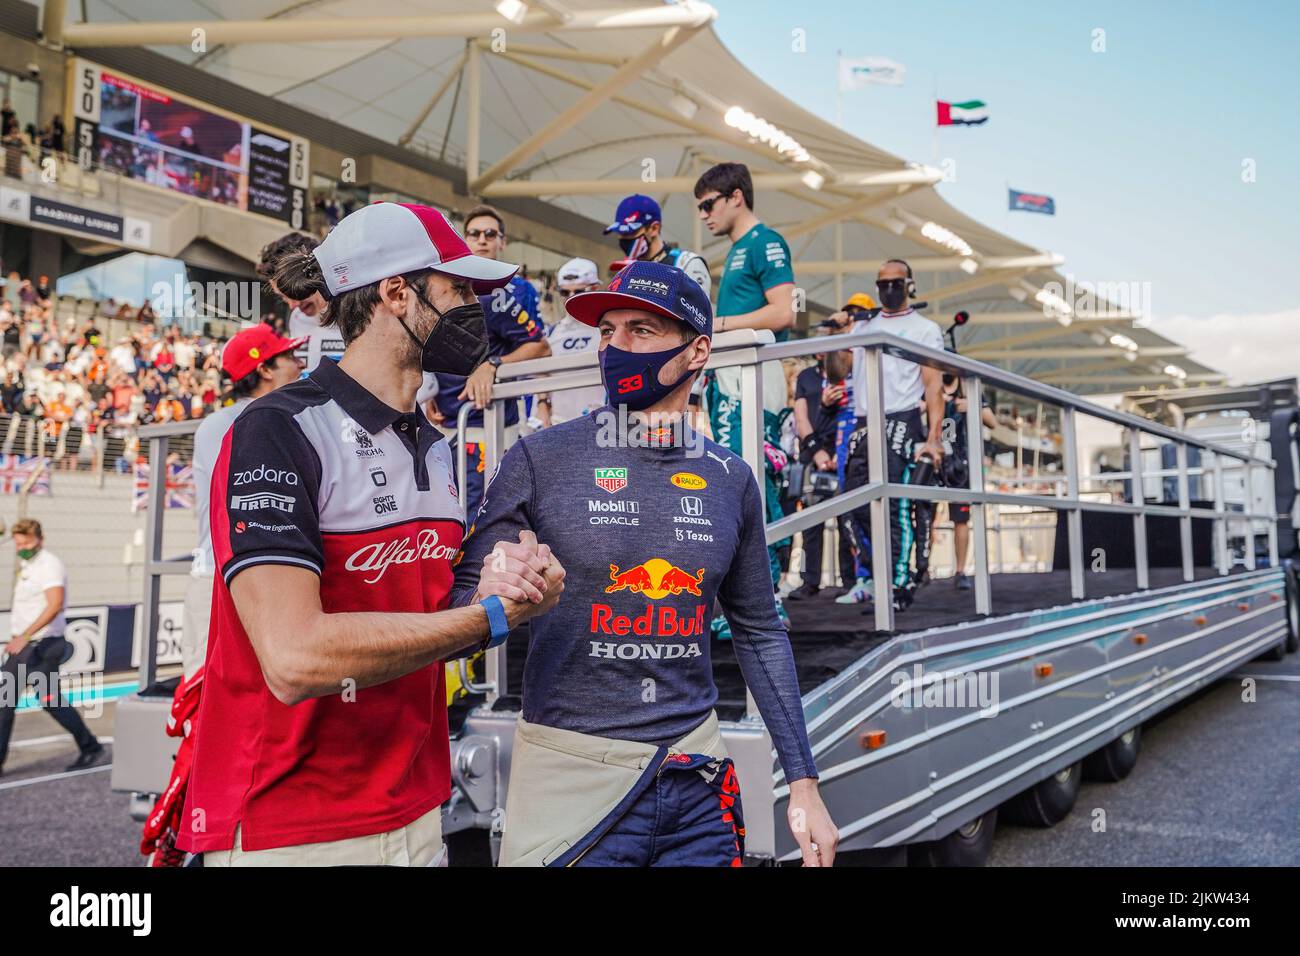 A colleague congratulating Max Verstappen on the victory in Formula 1 Grand Prix, Abu Dhabi Final 2021, UAE Stock Photo